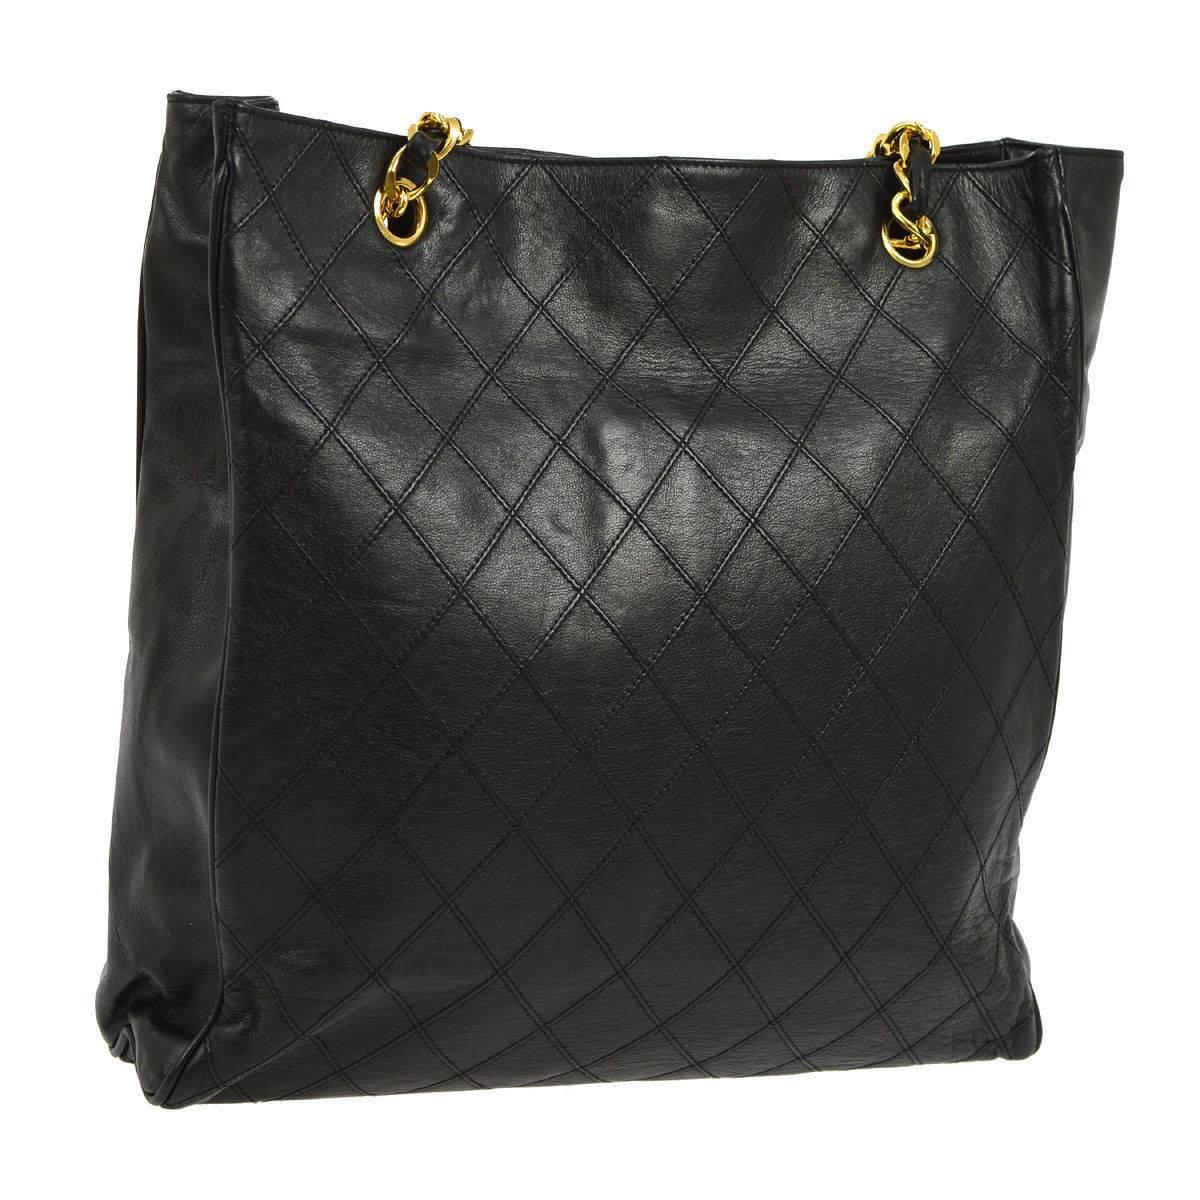 Chanel Vintage Black Leather Quilted Carryall Shopper Tote Shoulder Bag In Good Condition In Chicago, IL